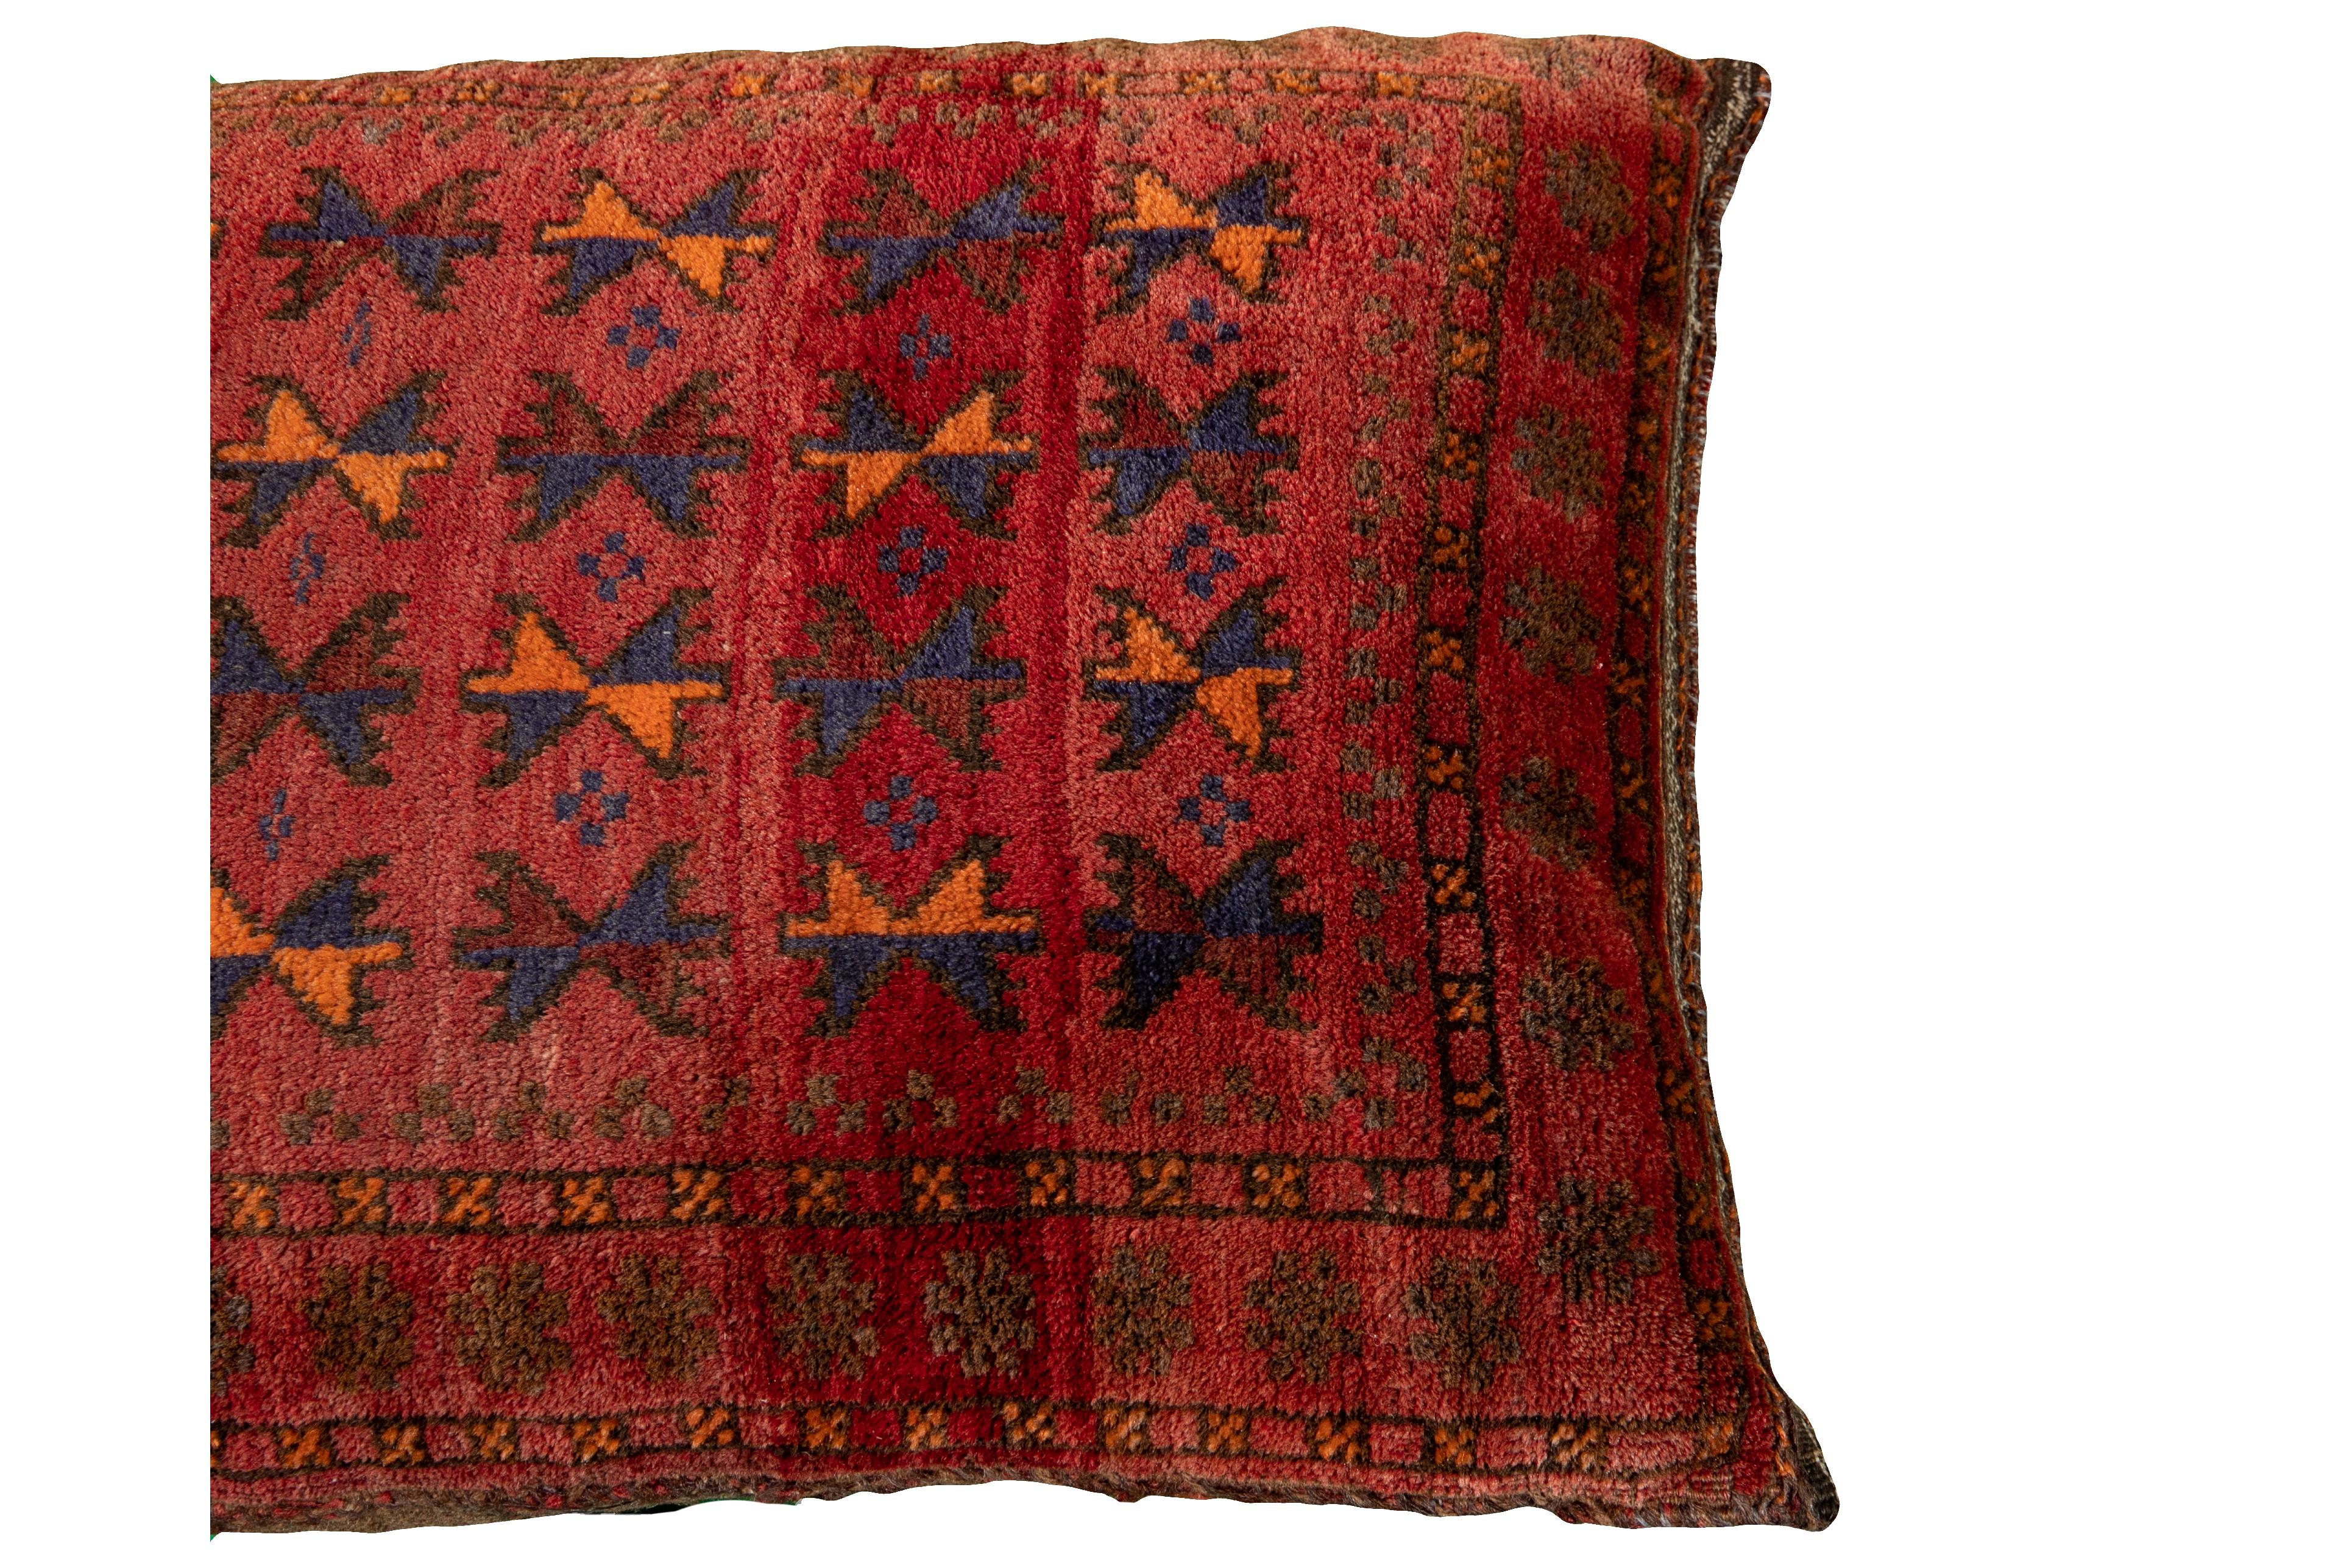 Beautiful vintage Persian Turkmen handmade pillow with a red field. This Persian Pillow has accents in orange and blue. This Turkmen Pillow features a Vintage take on a Classic design motif in vibrant colors to produce a vigorous experience of